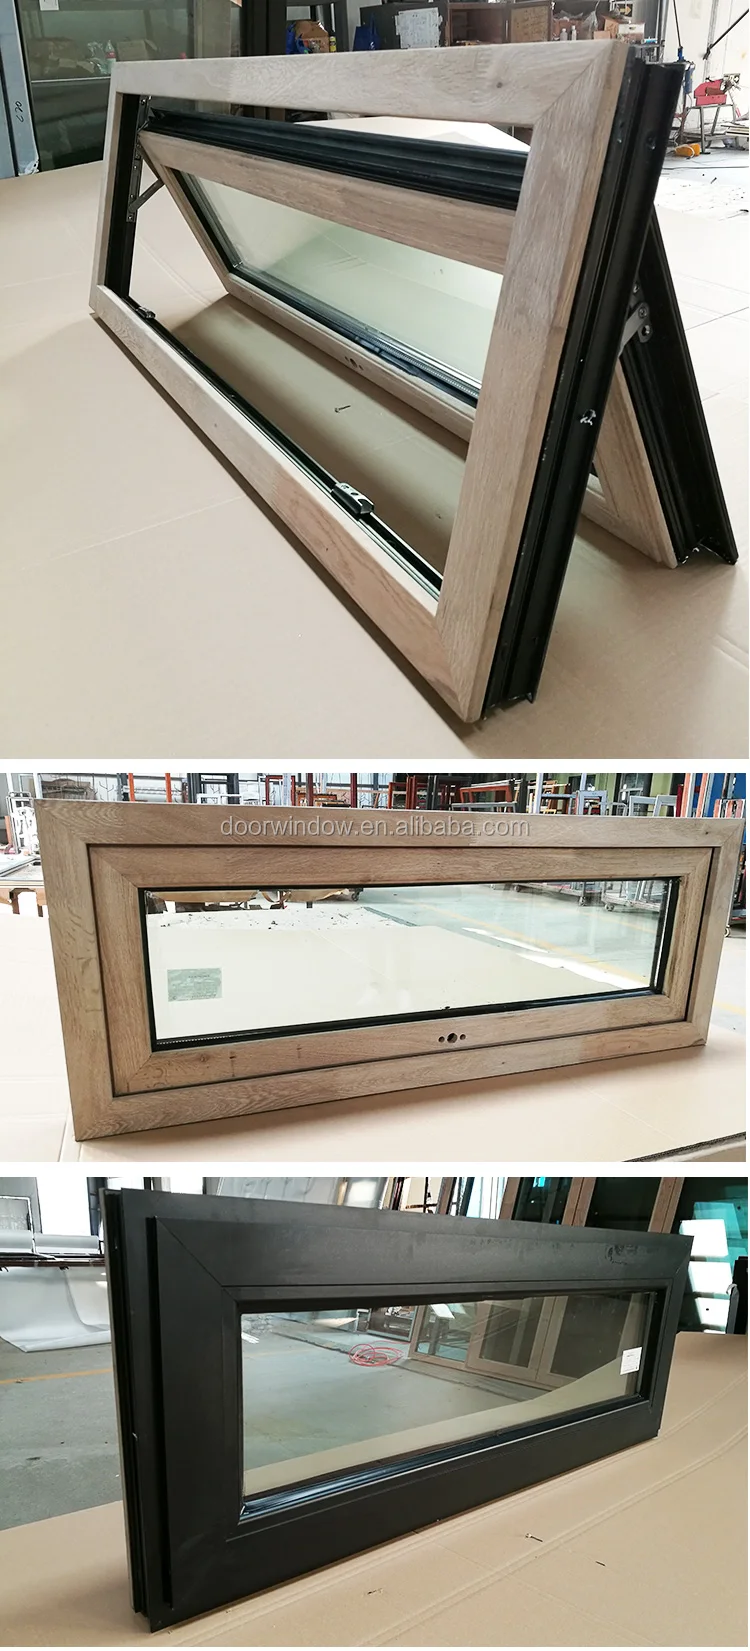 High Quality Good Aluminum residential awning top hung Windows window with Chinese hardware AS2047 CE AS1288 certificate